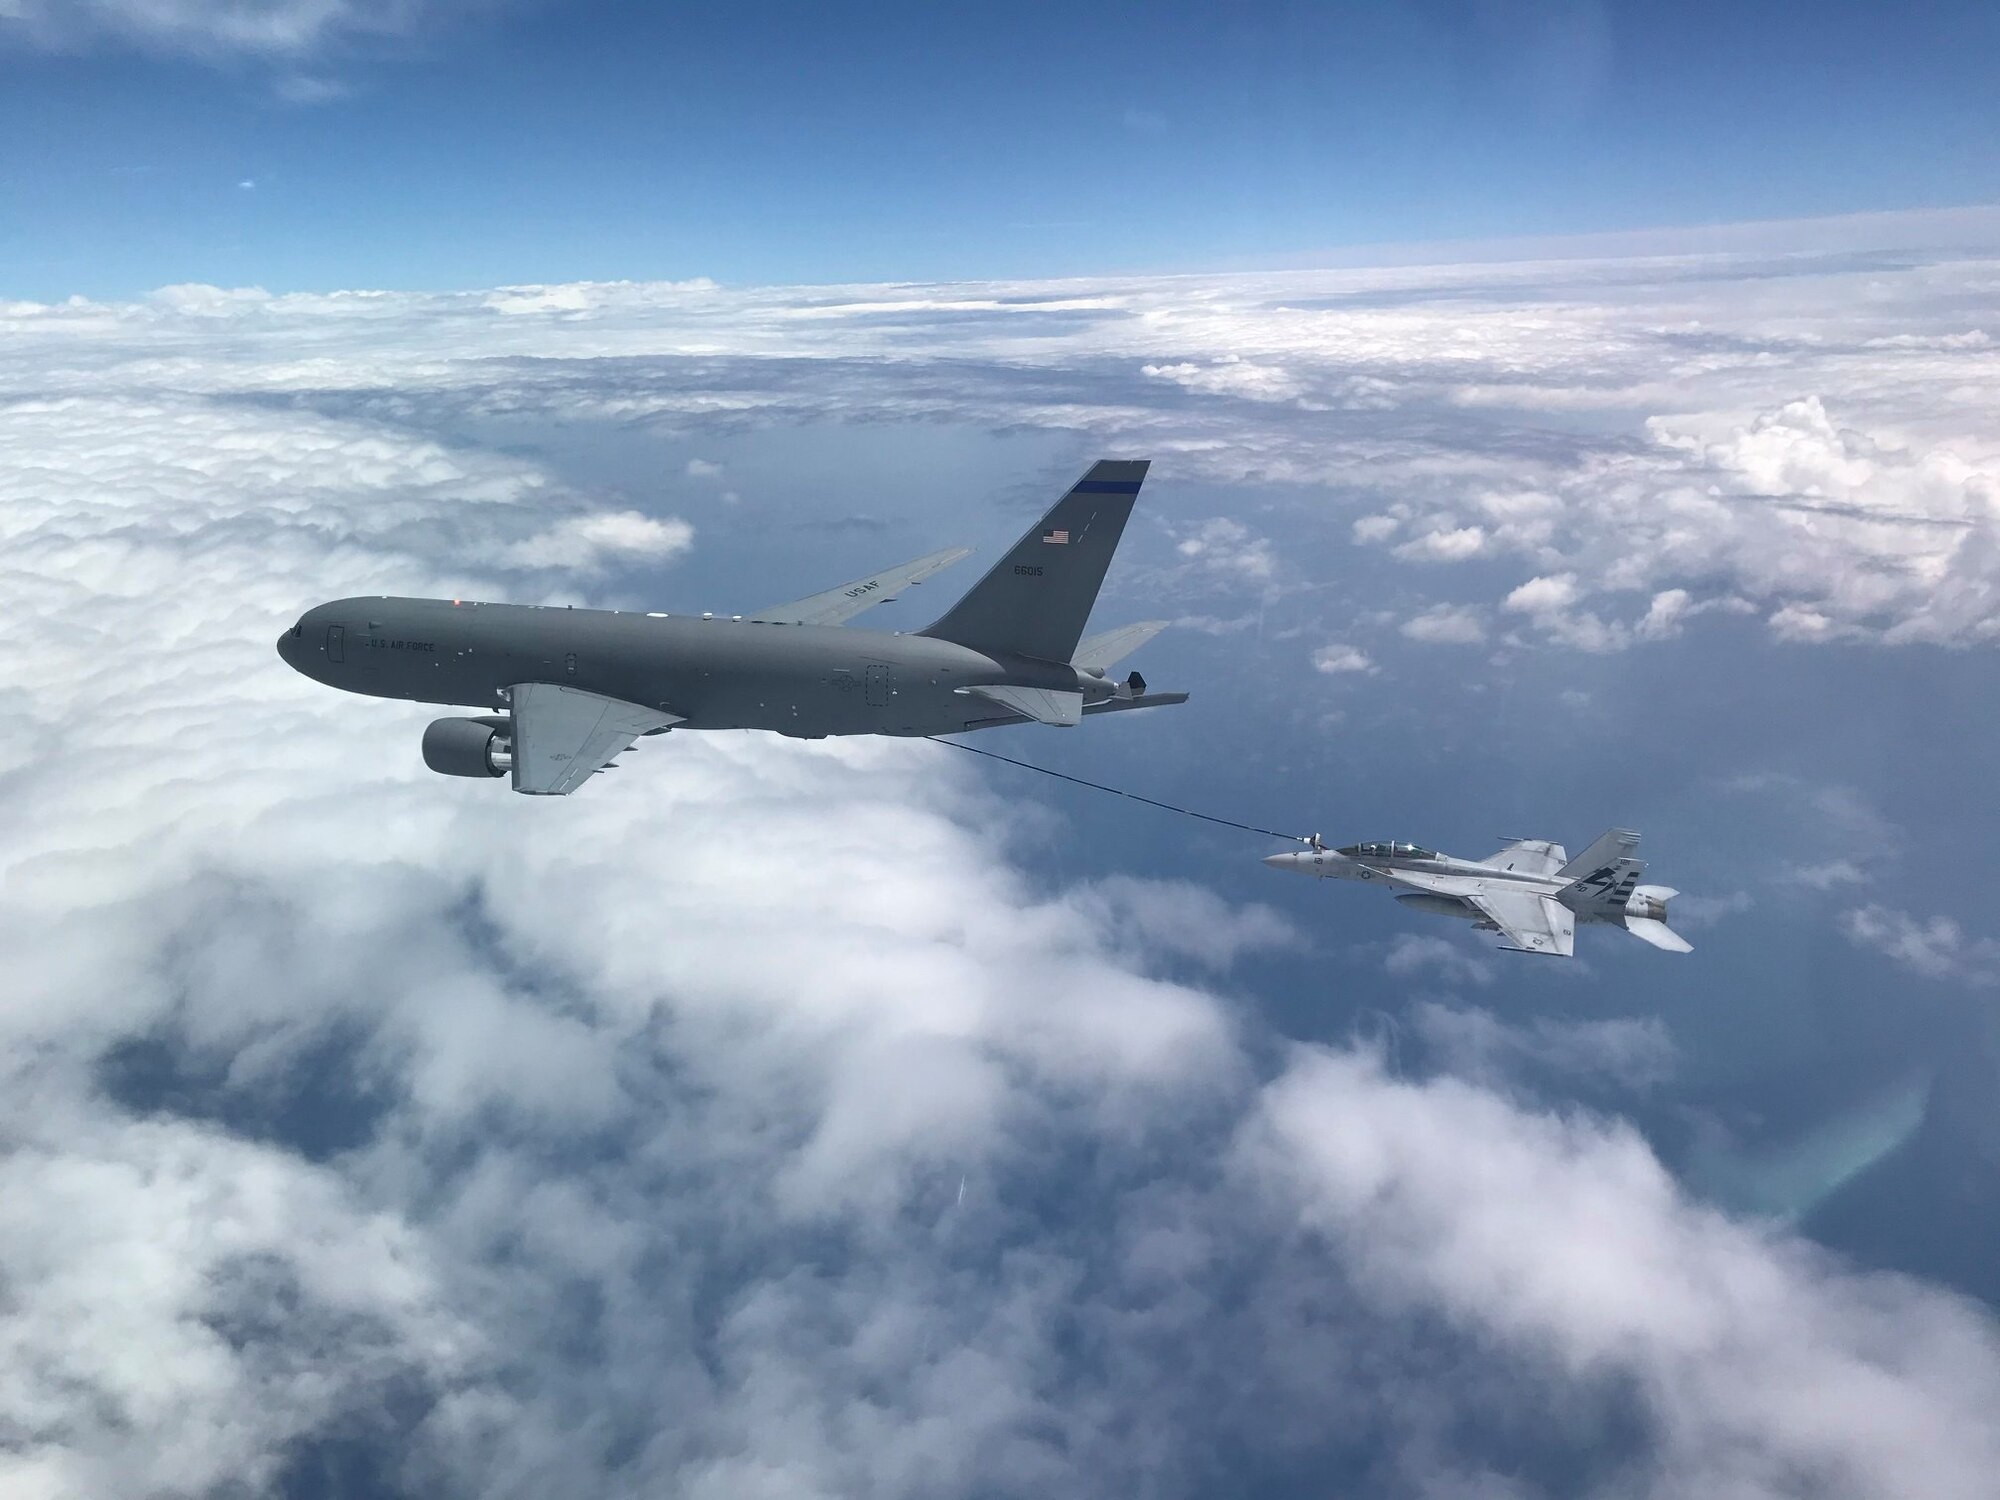 NH based KC-46A aircrew refuel a U.S. Navy F/A-18F Super Hornet off the coast of Maryland, July 1, 2020. This marked the first time the aircrew utilized the KC-46A centerline drogue system to refuel an aircraft. (Photo by Lt. Zach Fisher, U.S. Navy)